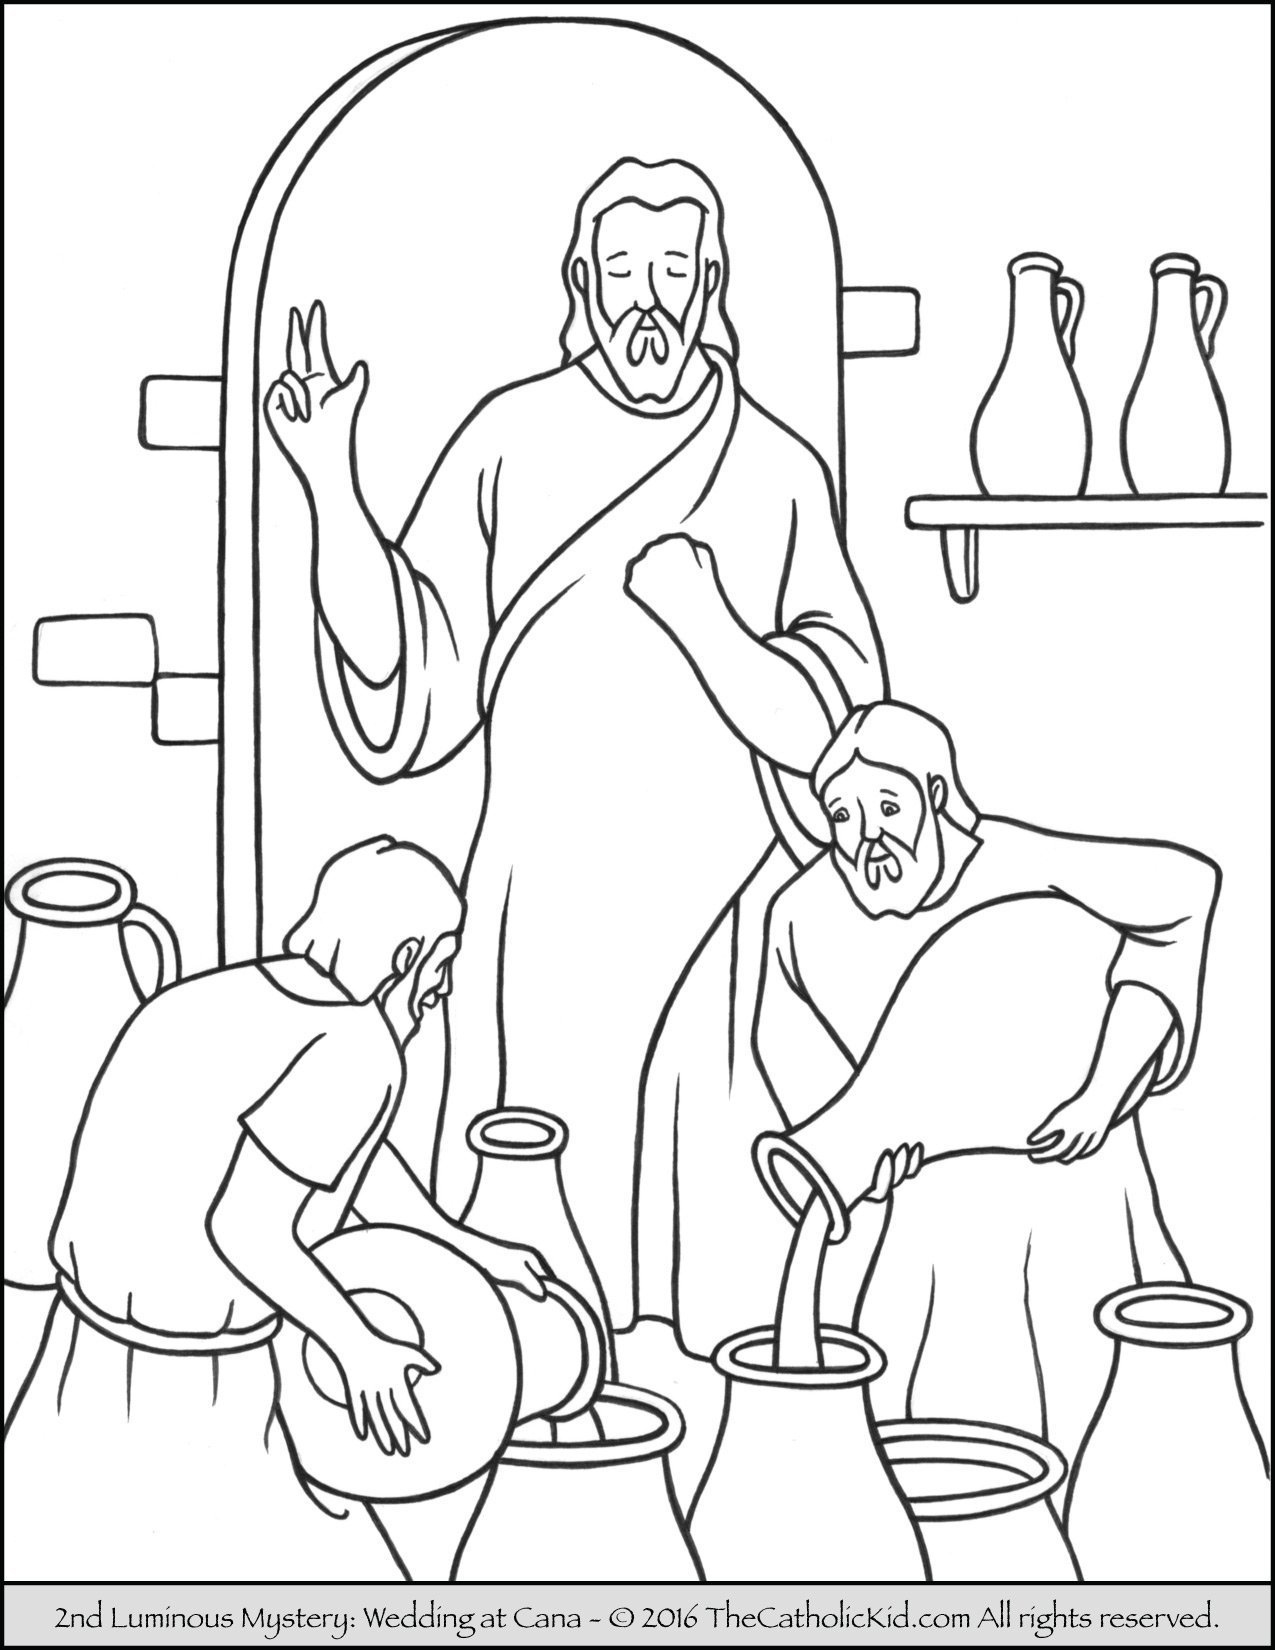 Luminous mysteries rosary coloring pages